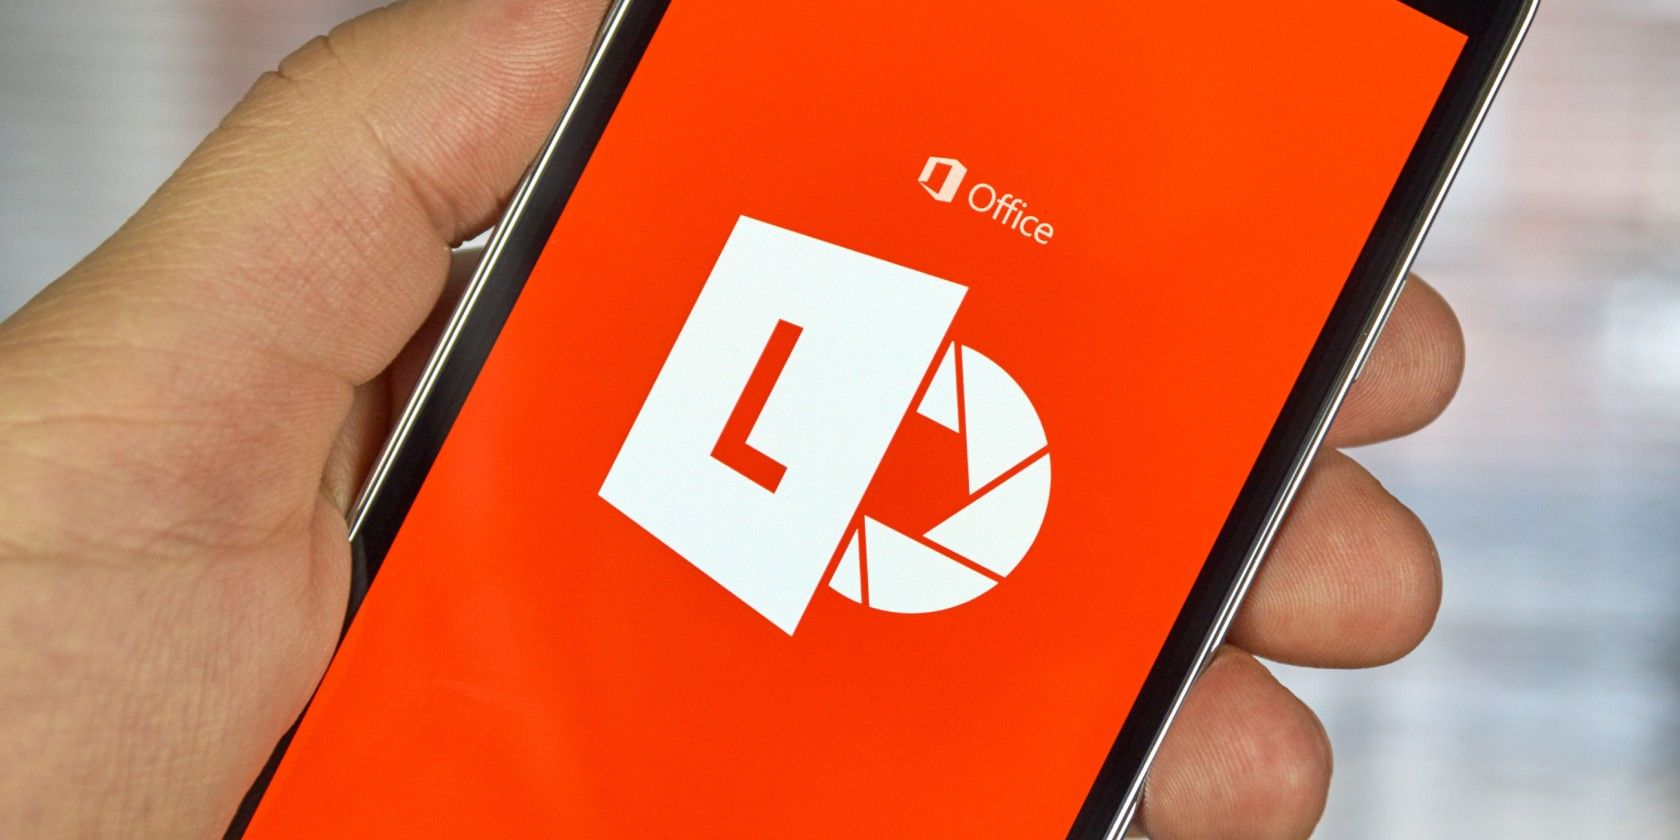 Microsoft Lens drops Office branding, presents new scanning features